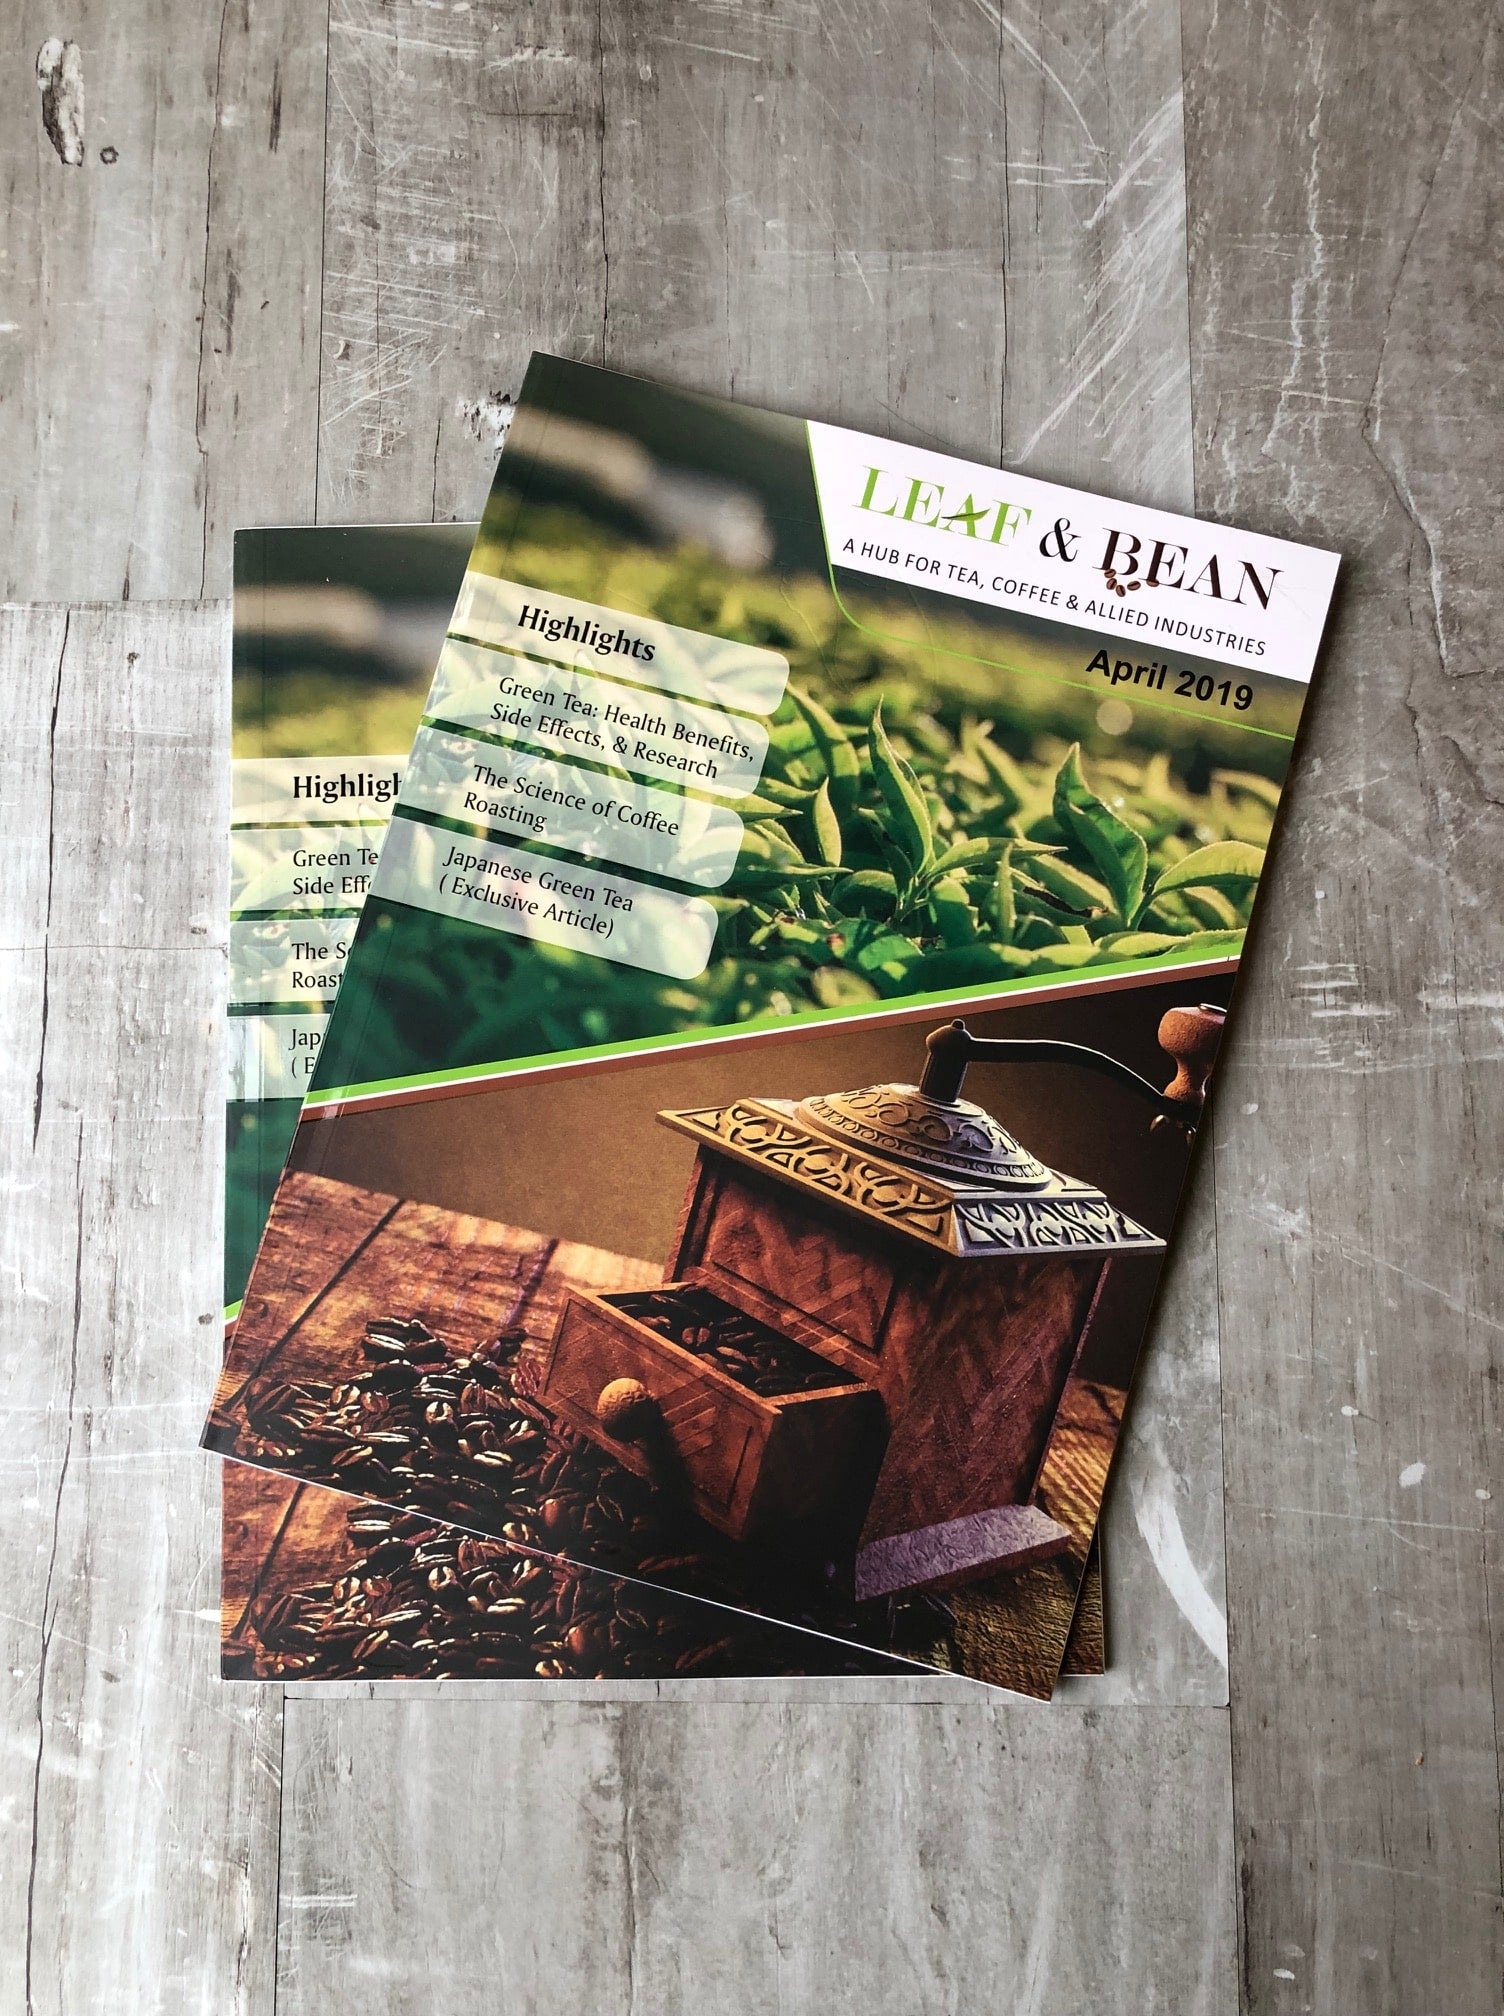 Leaf and Bean - Front cover - Japanese Green Tea Company